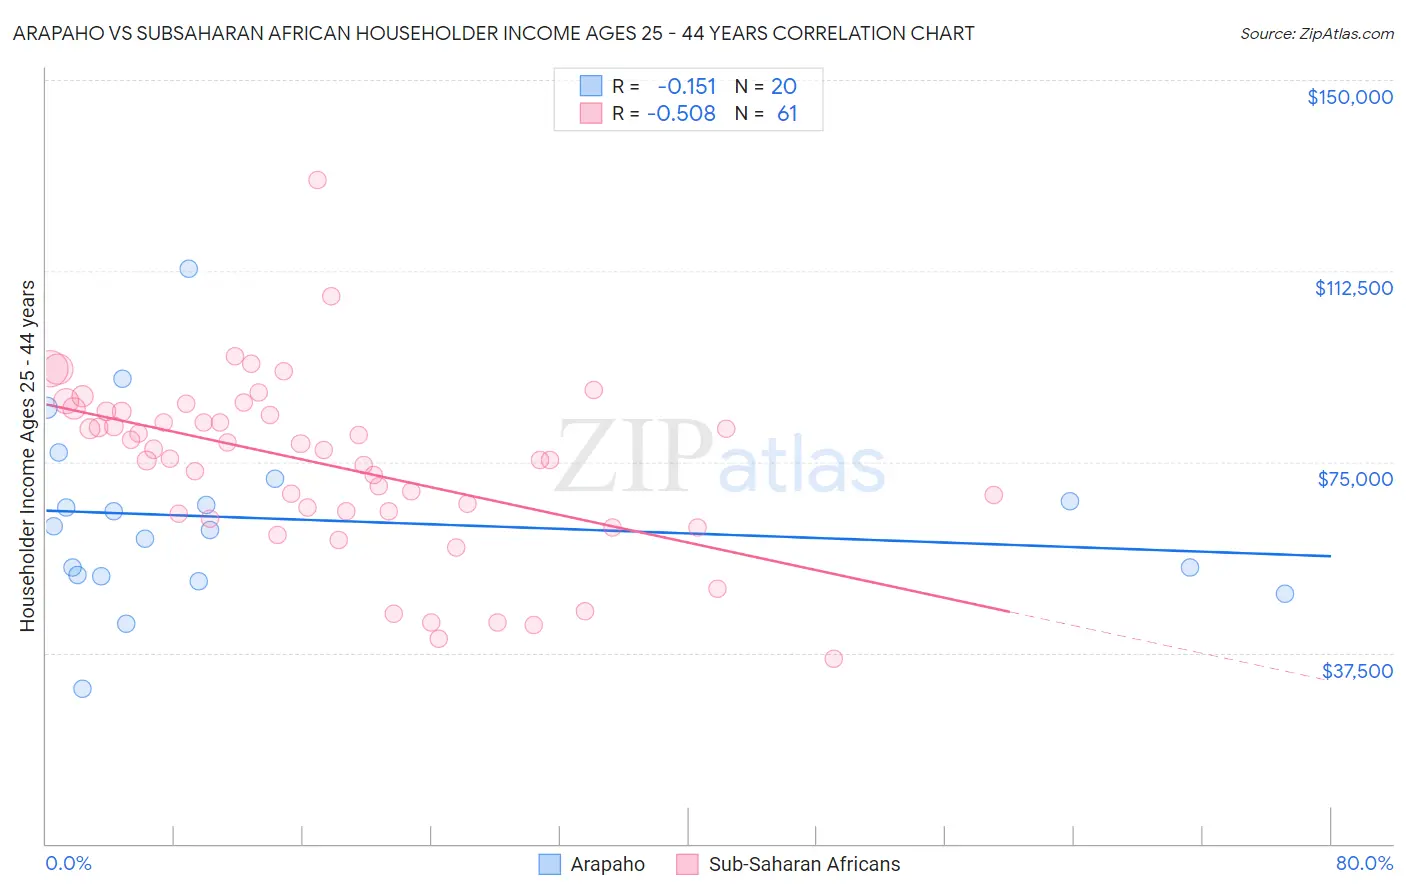 Arapaho vs Subsaharan African Householder Income Ages 25 - 44 years